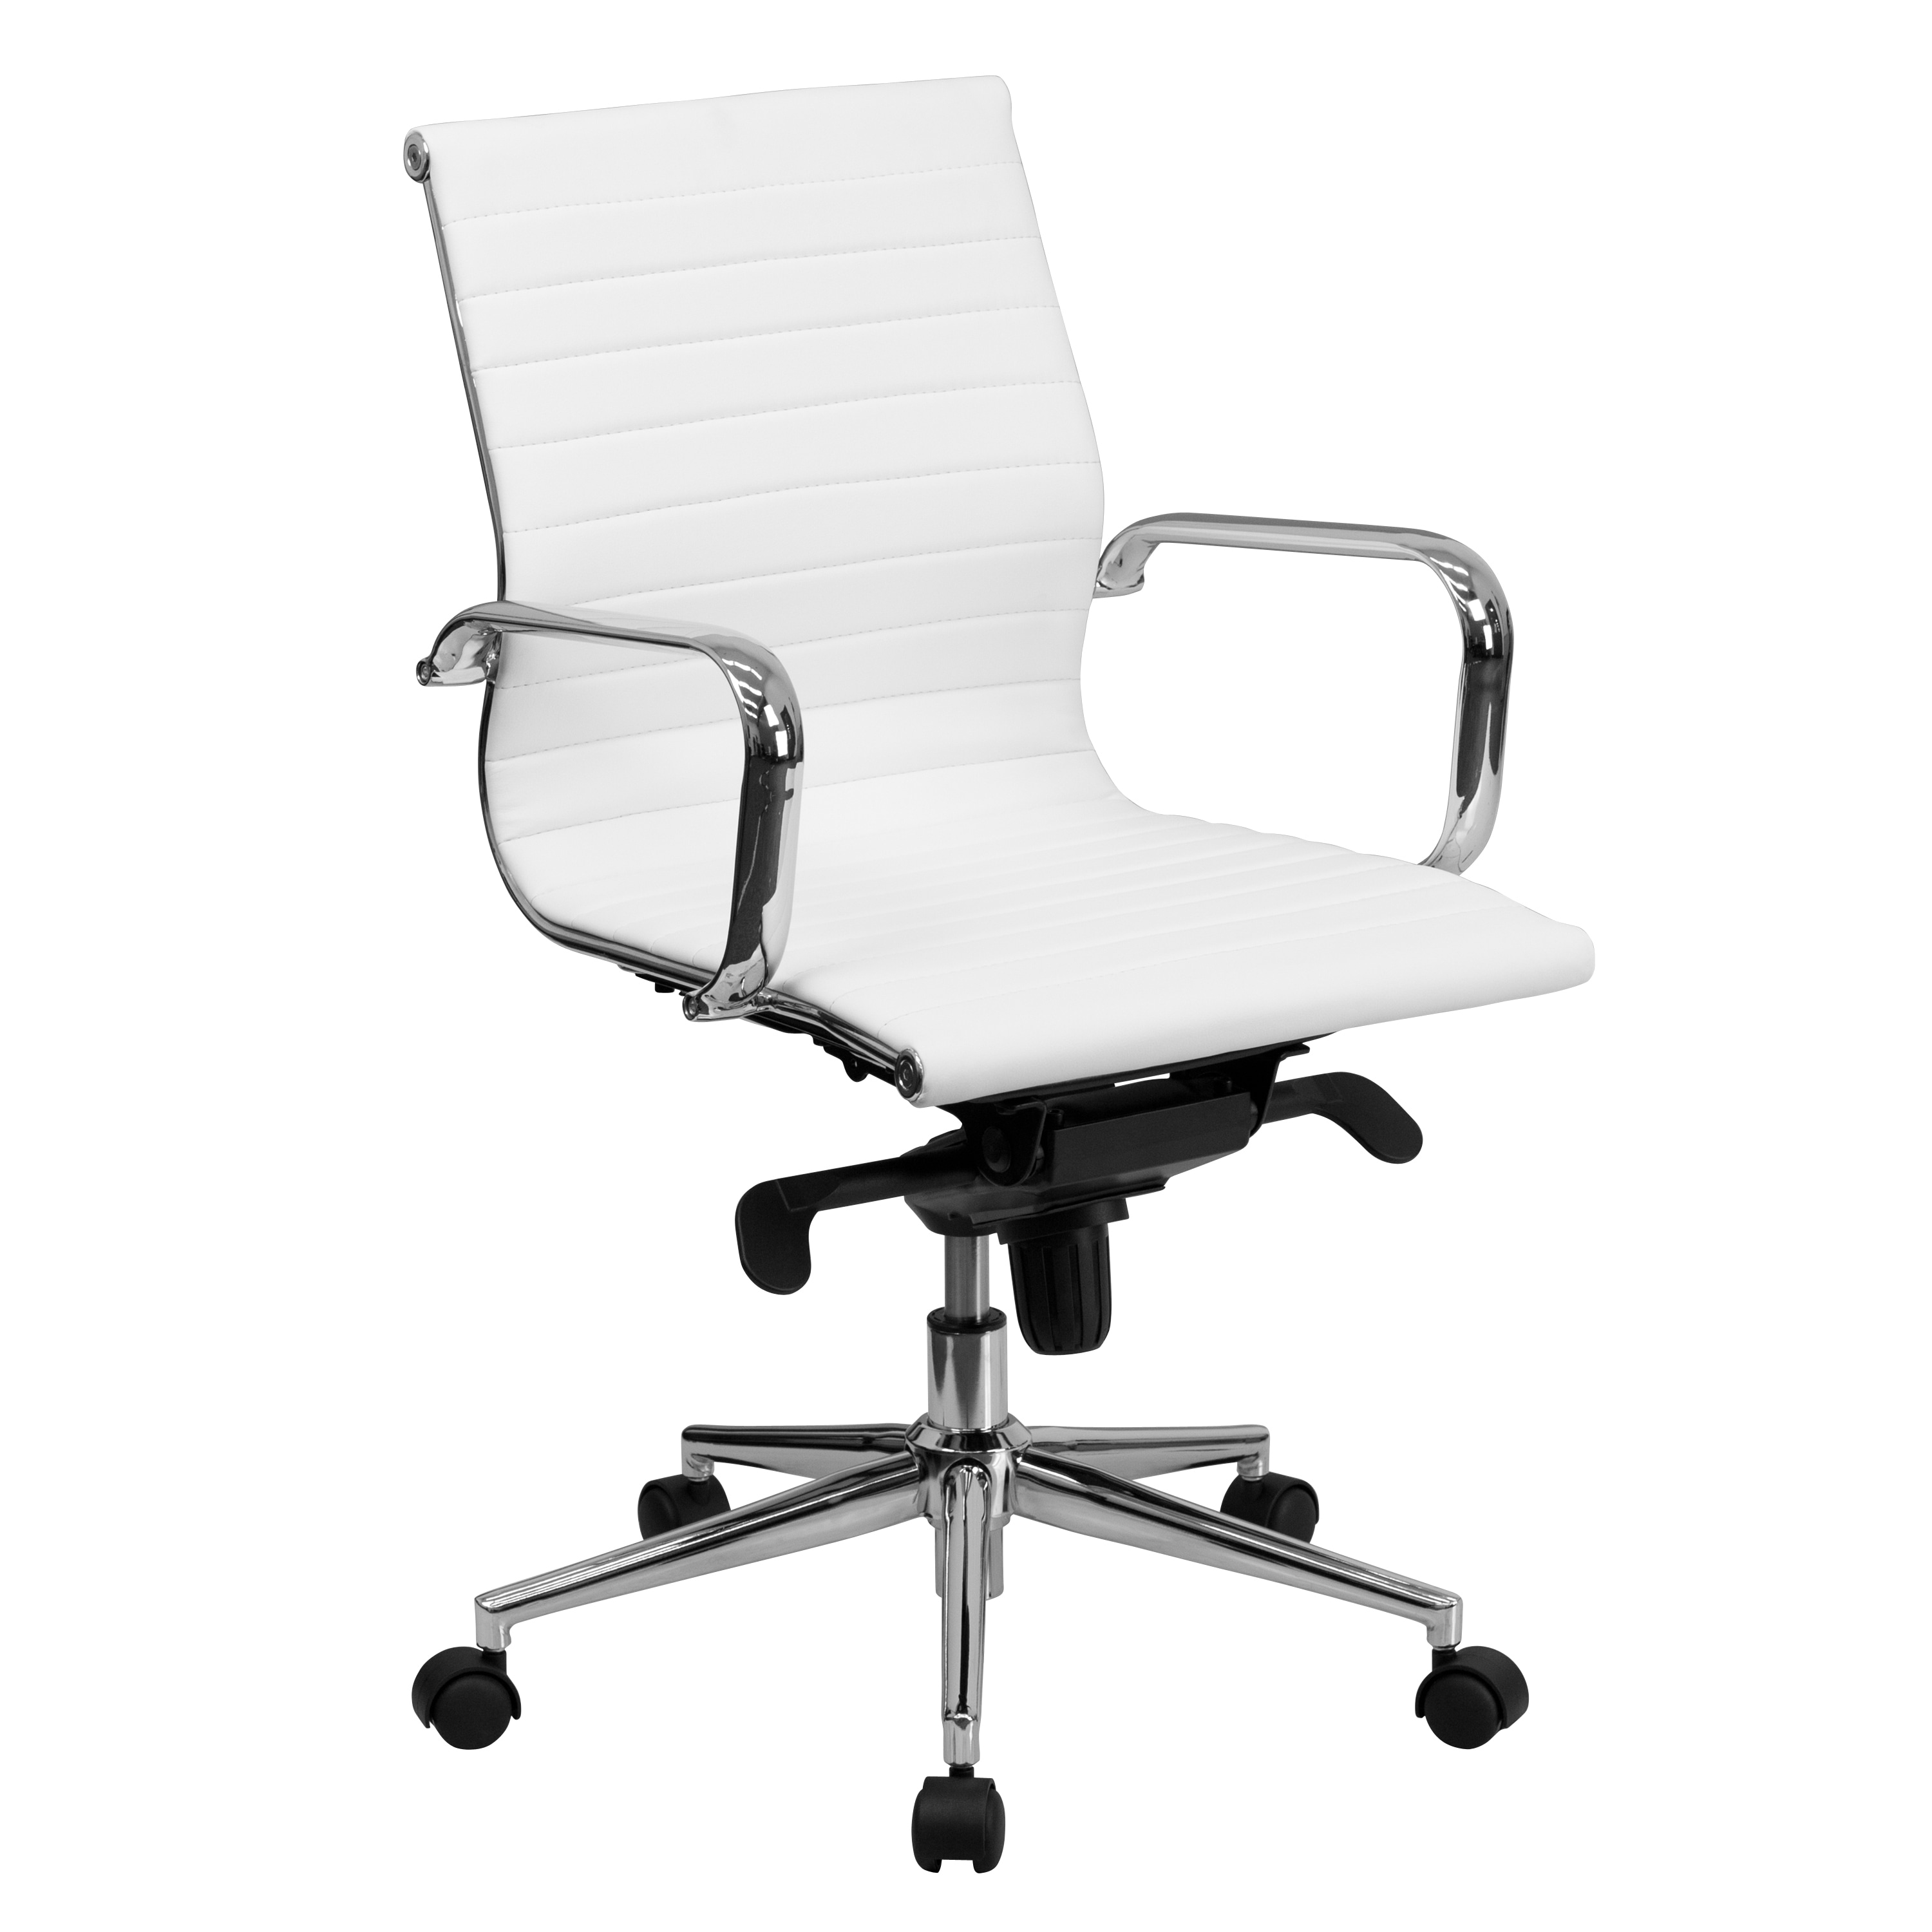 Shop Sleek White Ribbed Leather Swivel Adjustable Office Chair Overstock 11482723